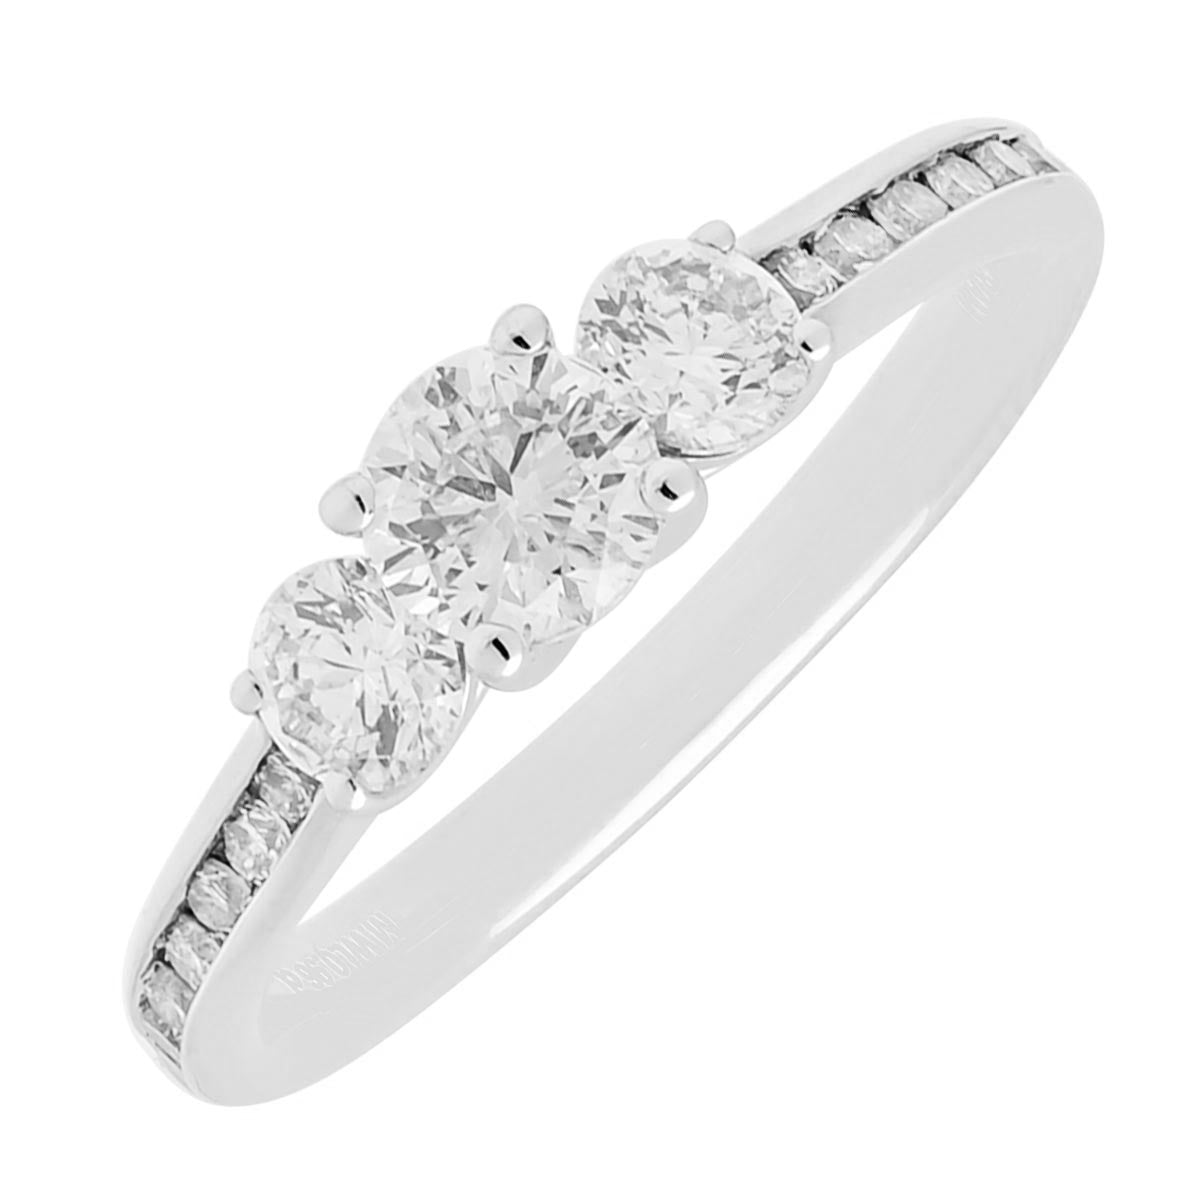 Northern Star Diamond Three Stone Ring in 14kt White Gold with Channel Set Diamonds (1ct tw)